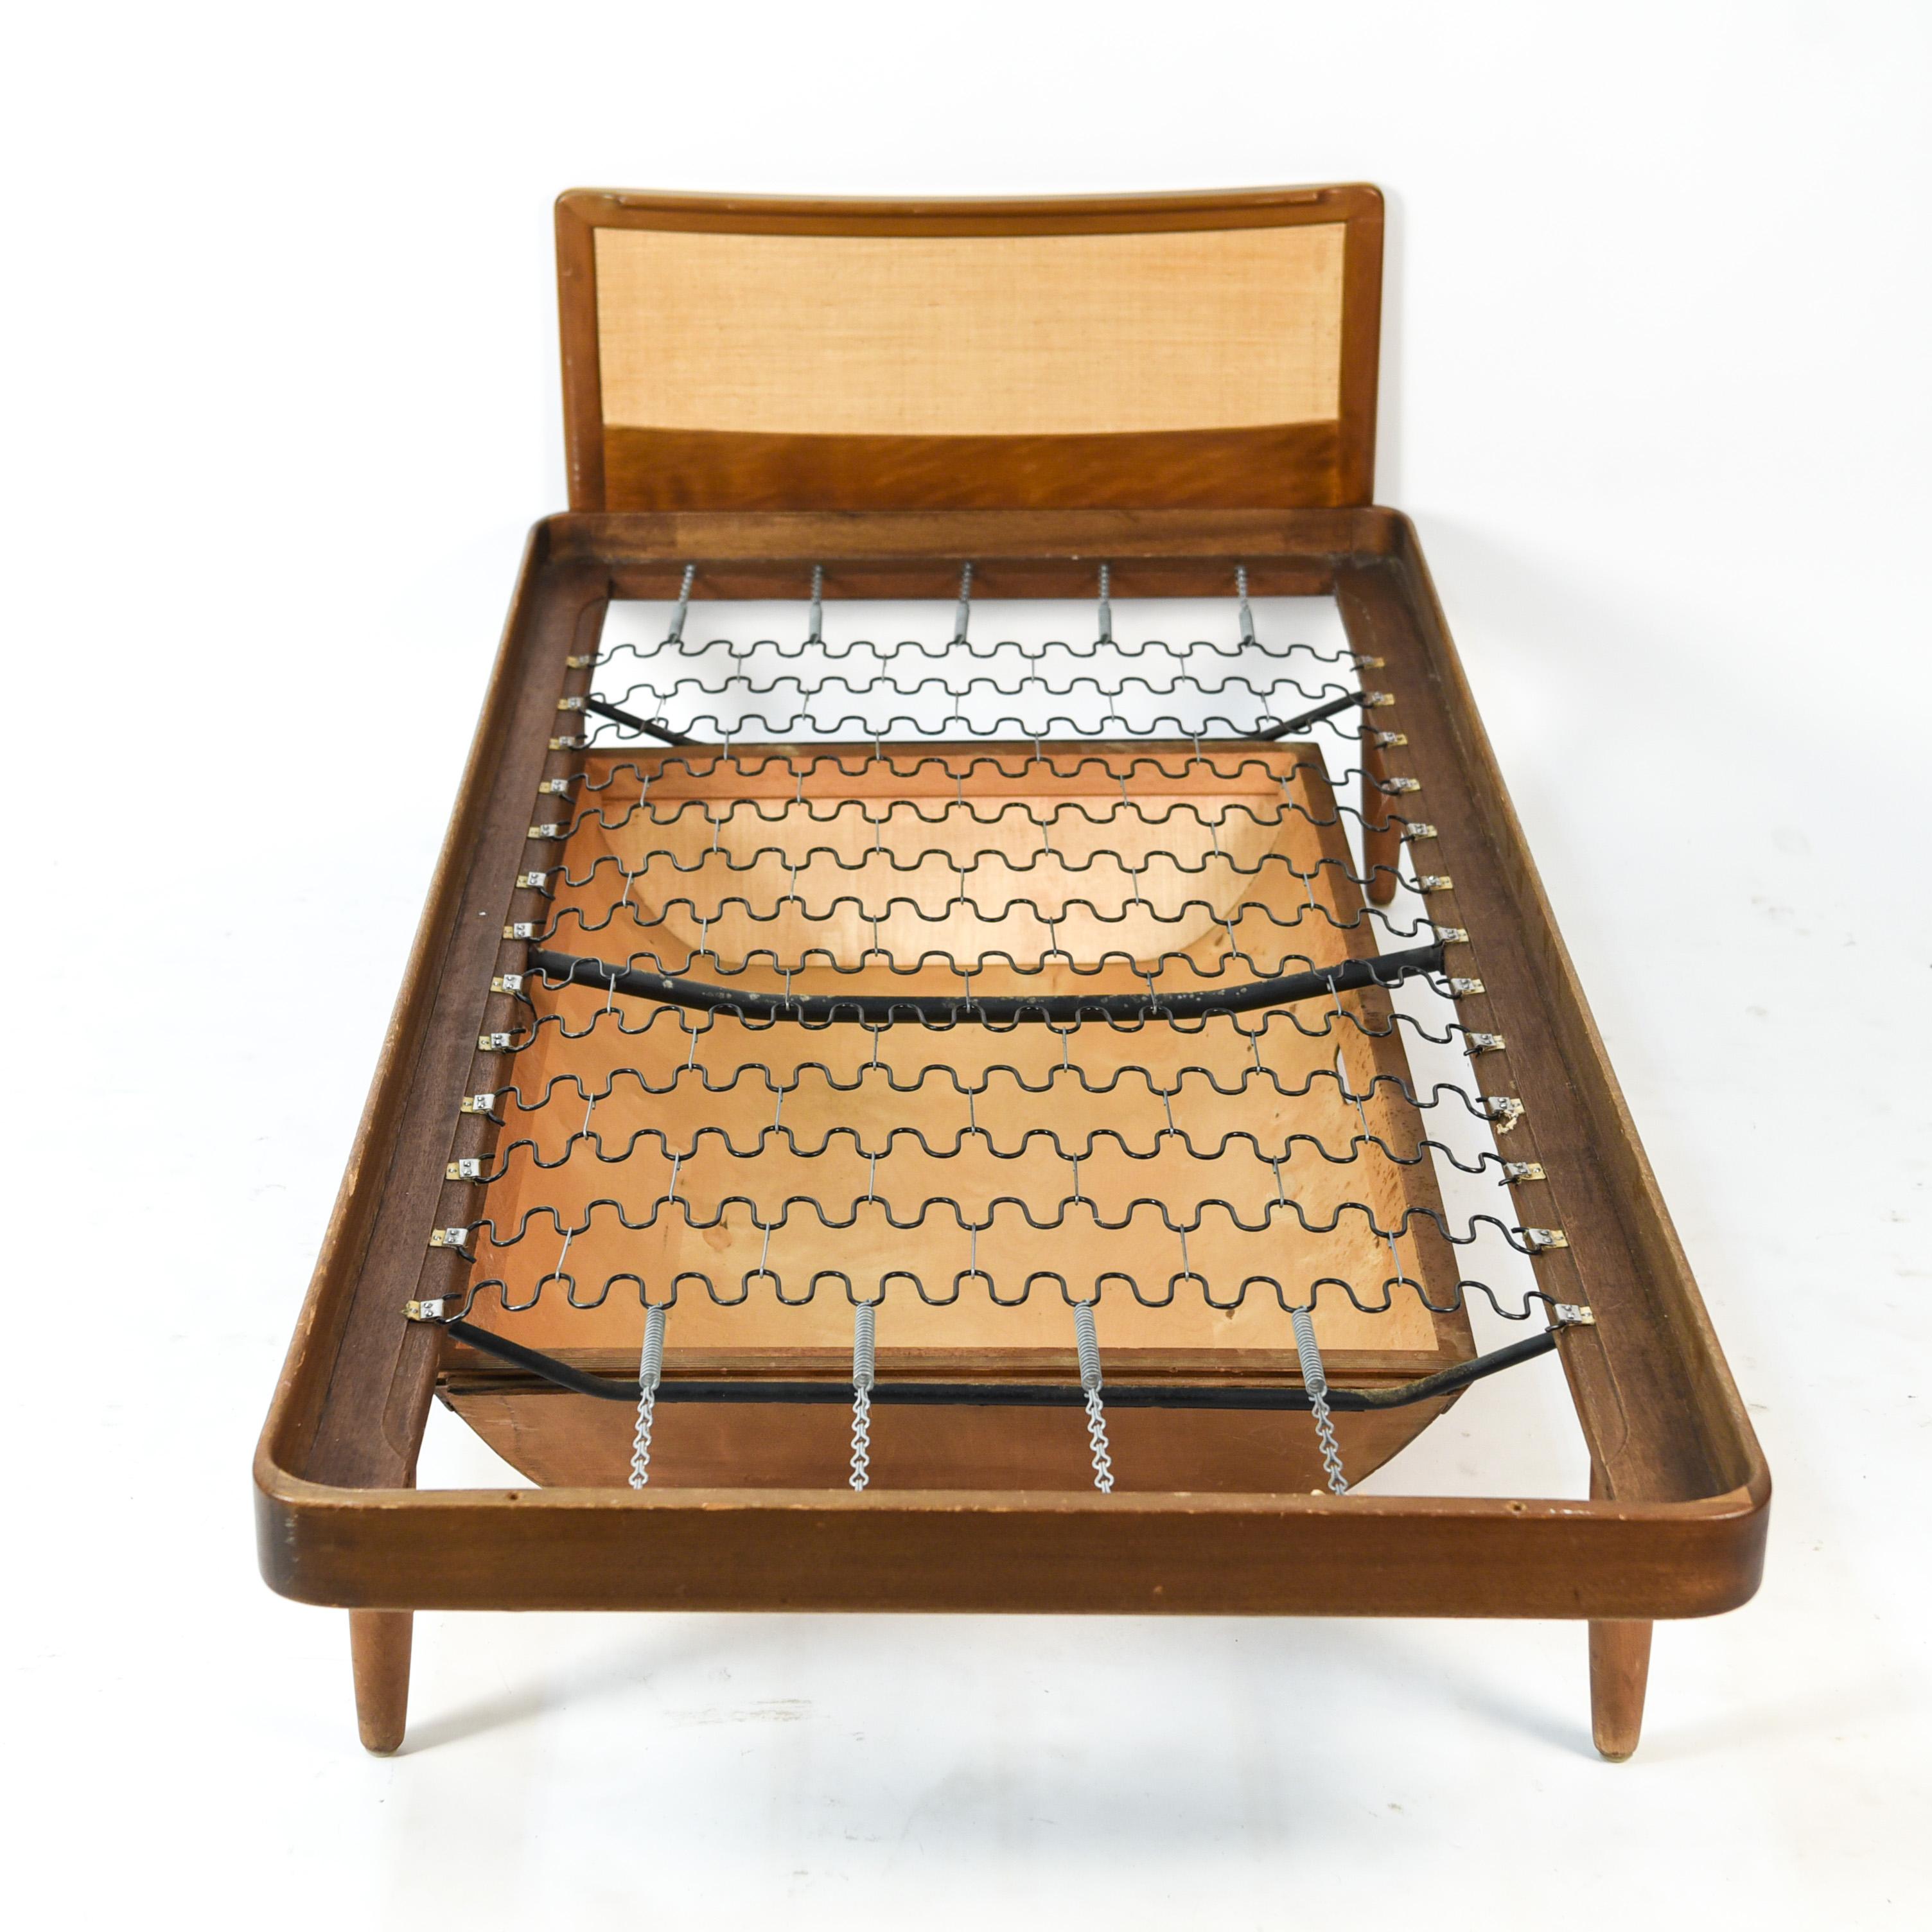 This Danish midcentury daybed is by Horsnaes Mobler, circa 1950s. With a teak frame and underneath pull-out storage bin. Ready for the mattress of your choice!